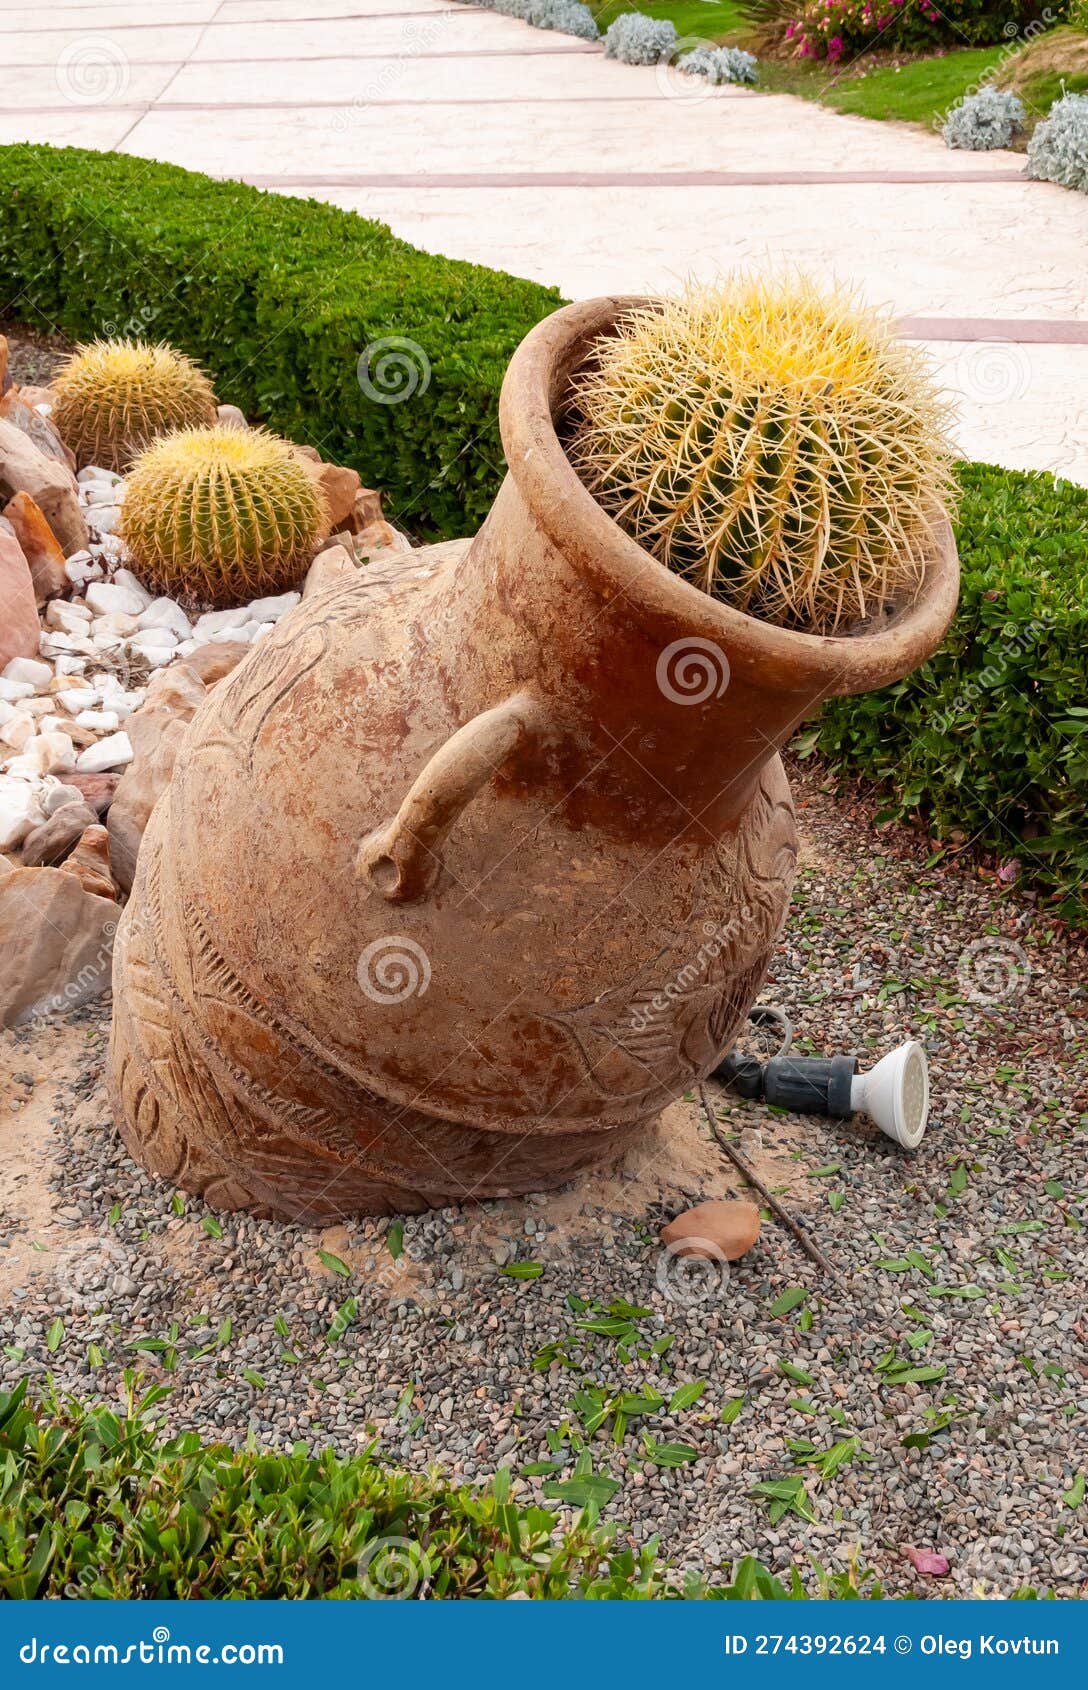 egypt - february 27, 2019: clay pots and cacti in a flowerbed in the interior and  of the courtyard of a hotel in marsa